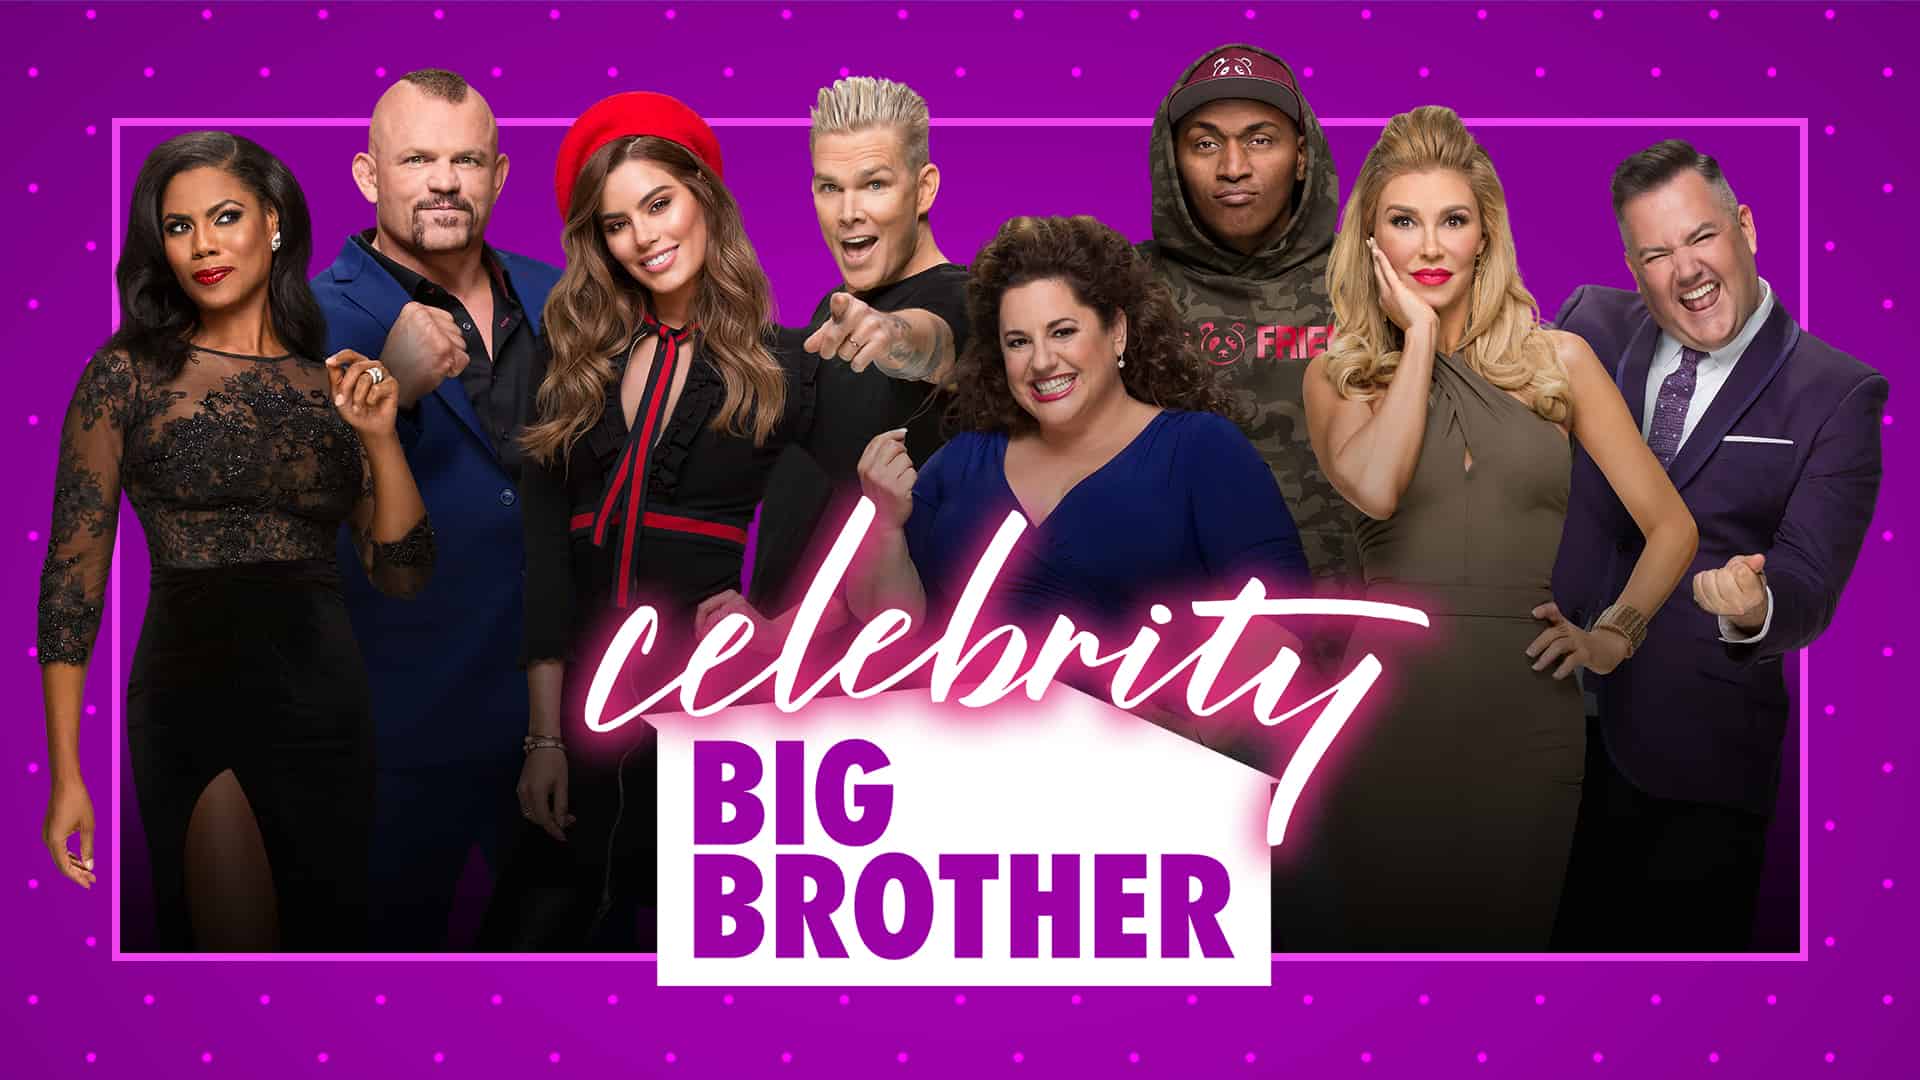 Where Can You Watch “Celebrity Big Brother?”